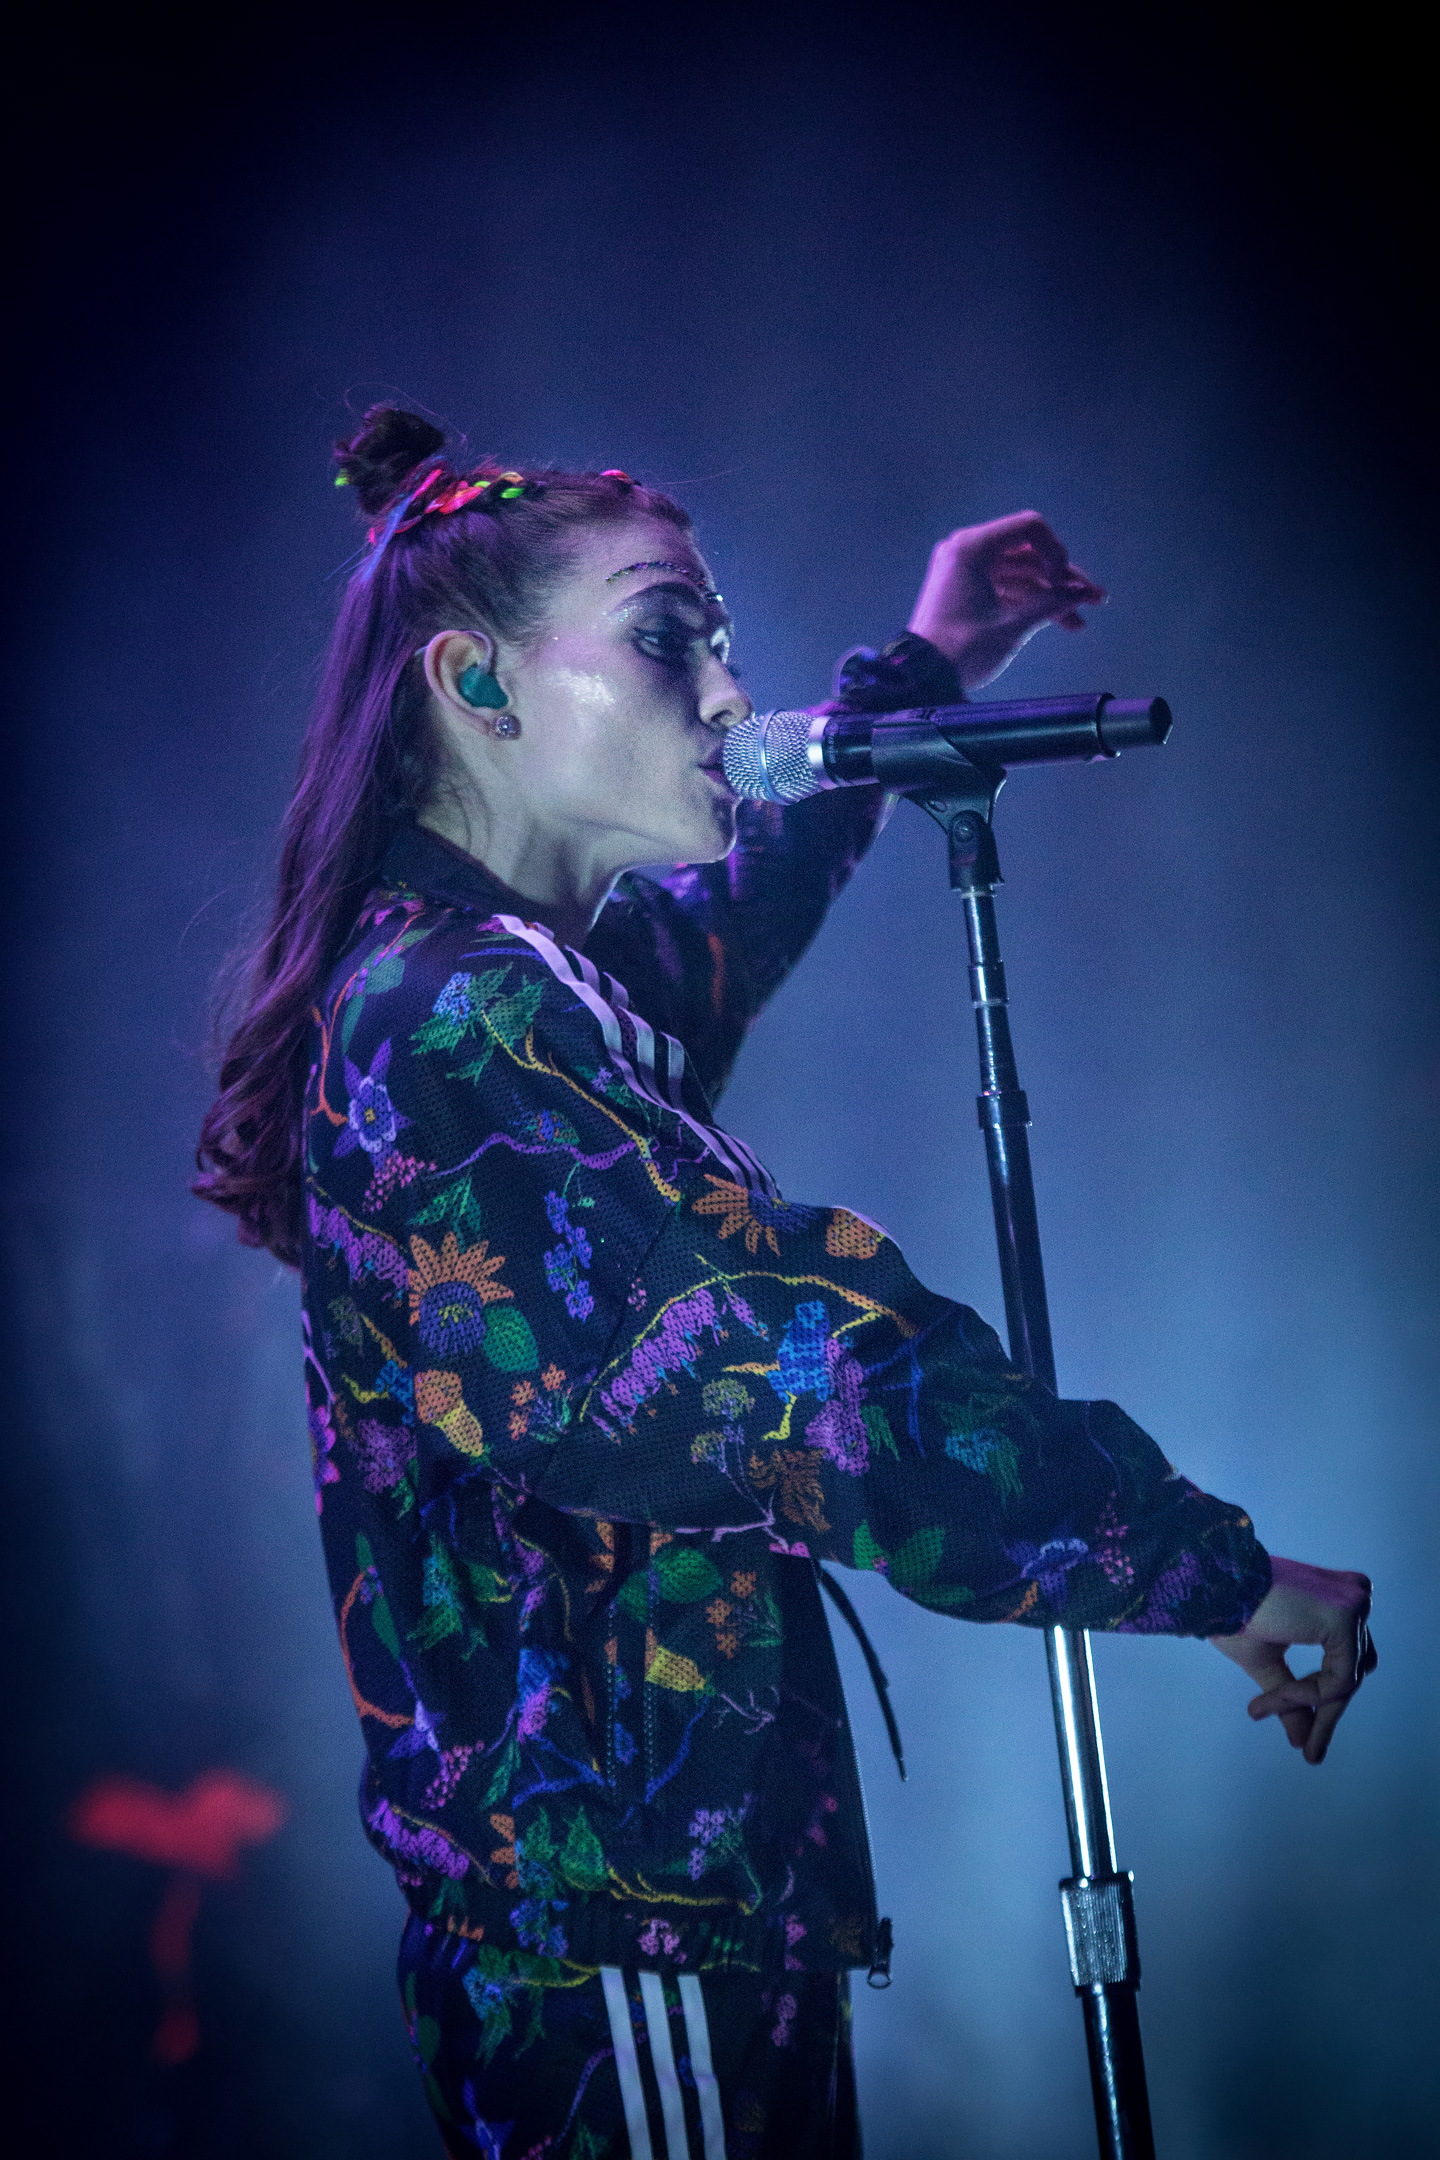 X-Ambassadors and MisterWives at Red Rocks in Denver, Colorado - Concert Photos